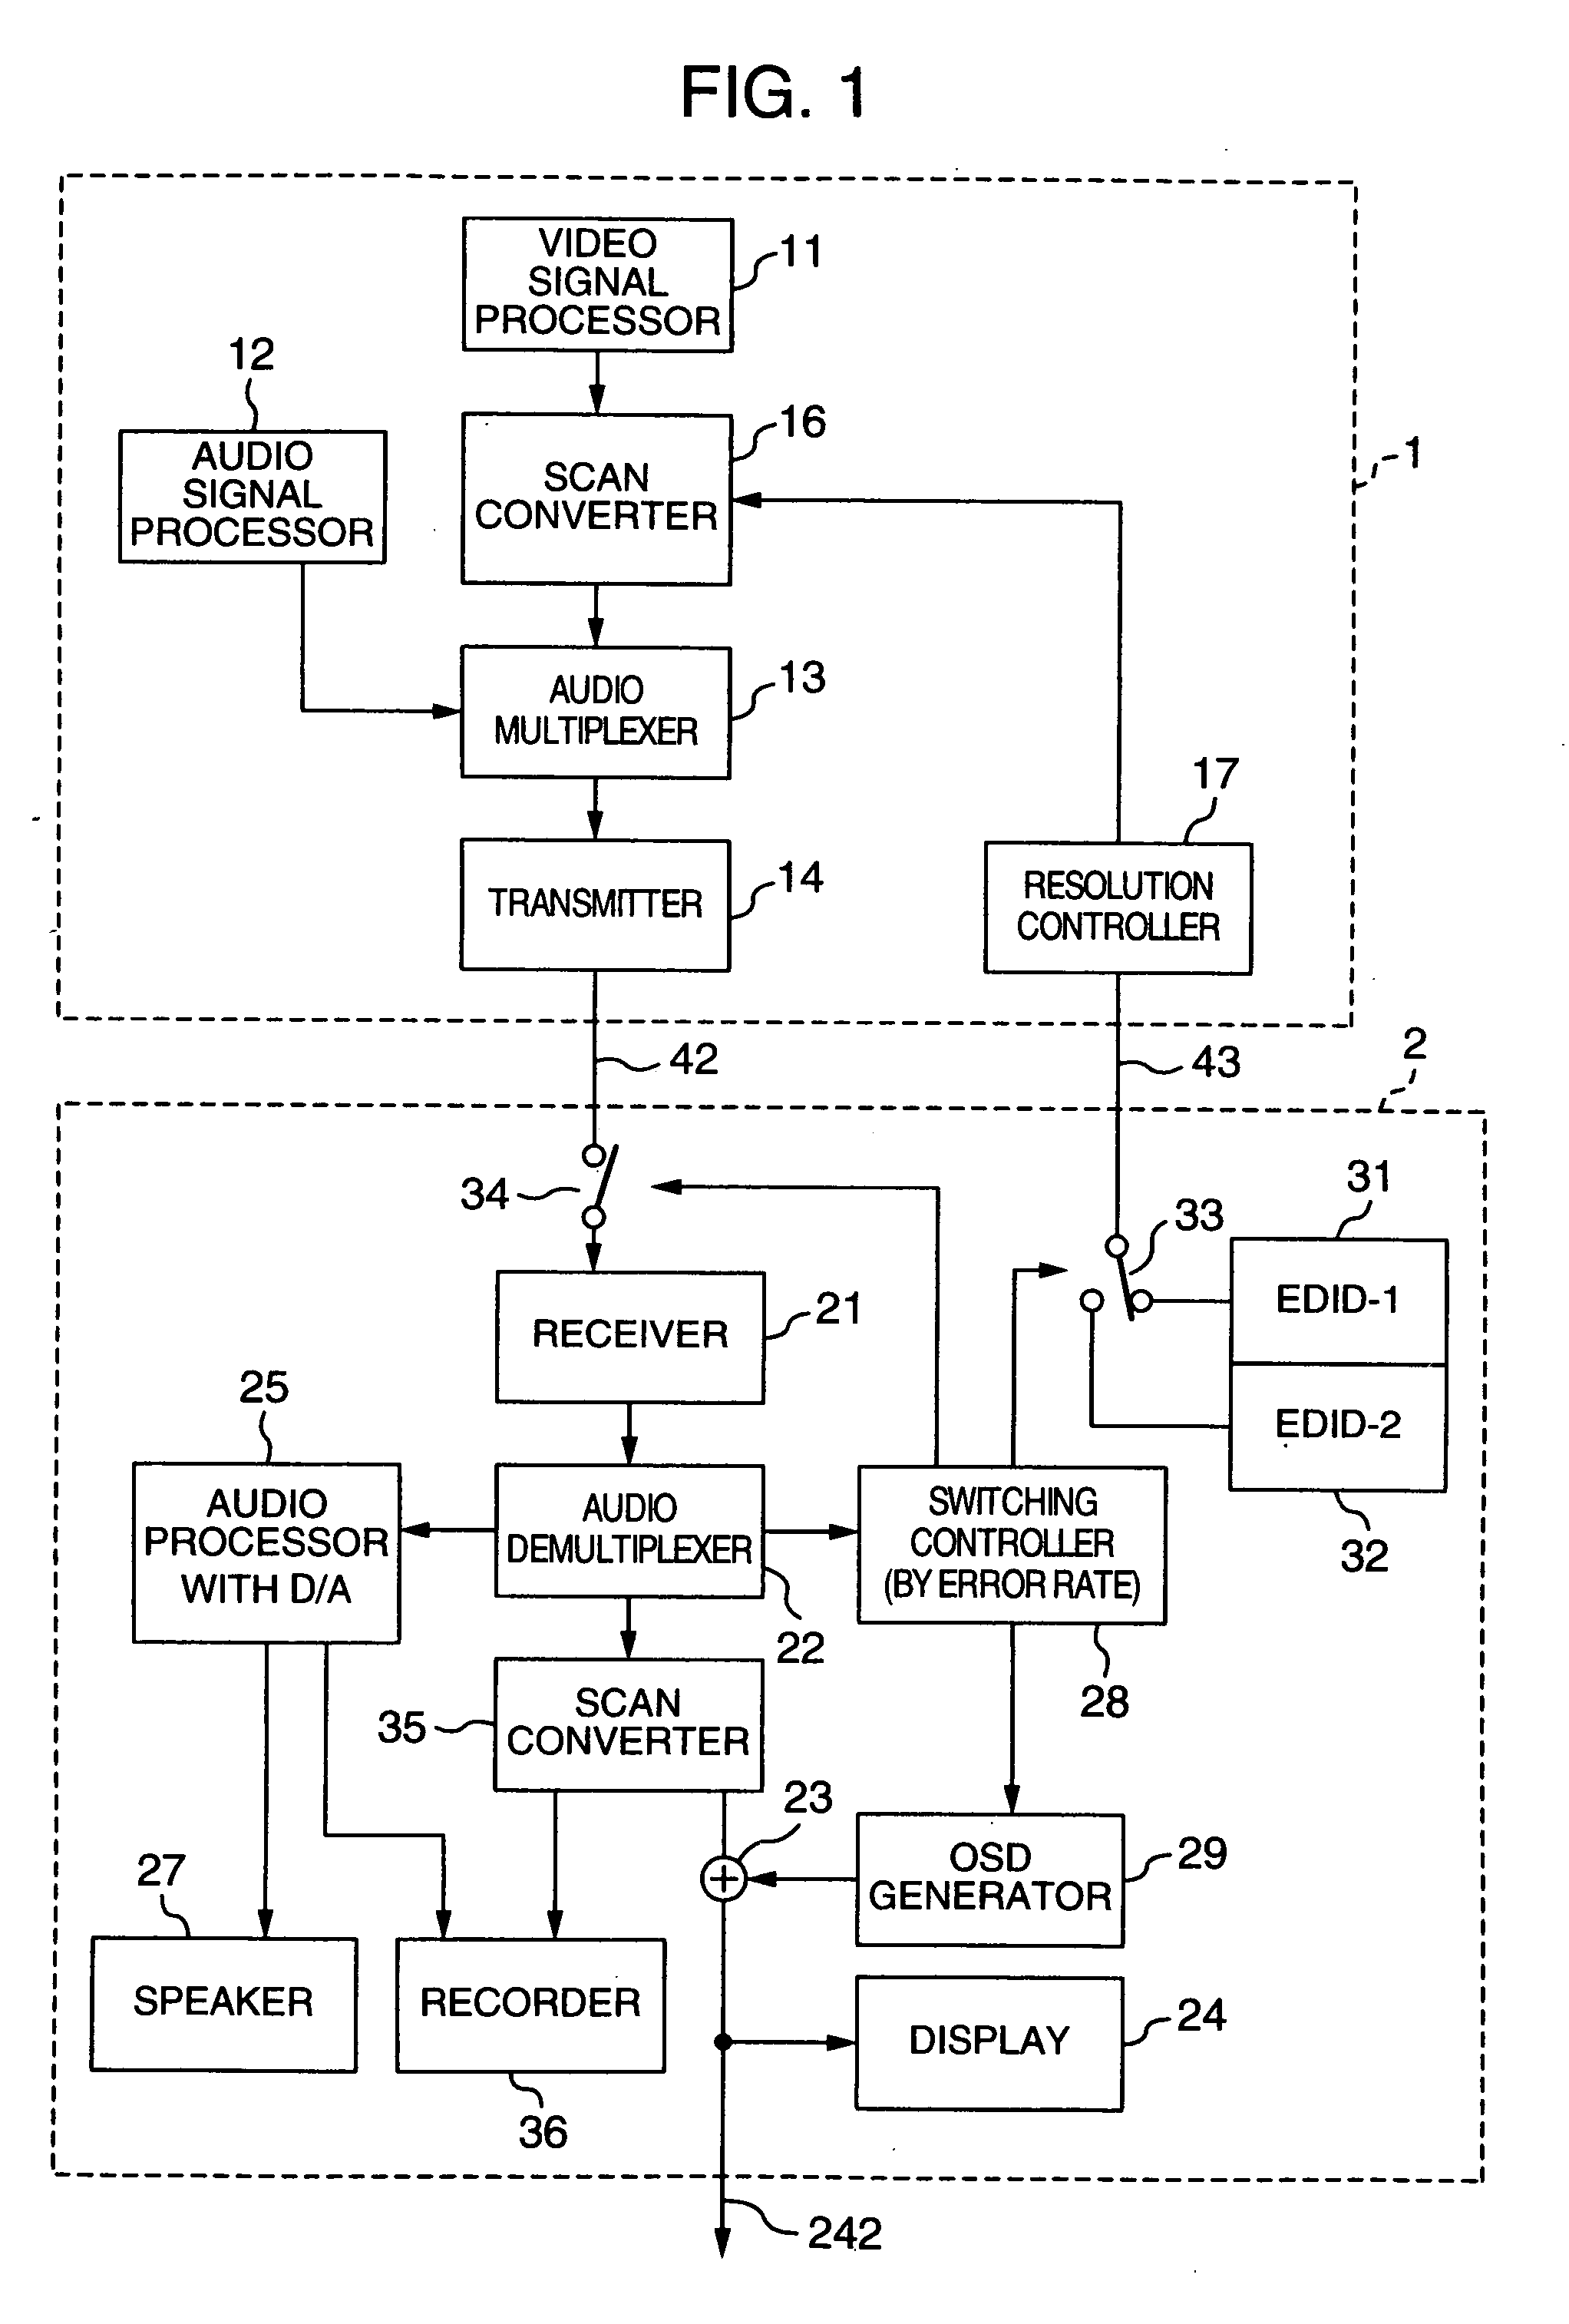 Video processing device